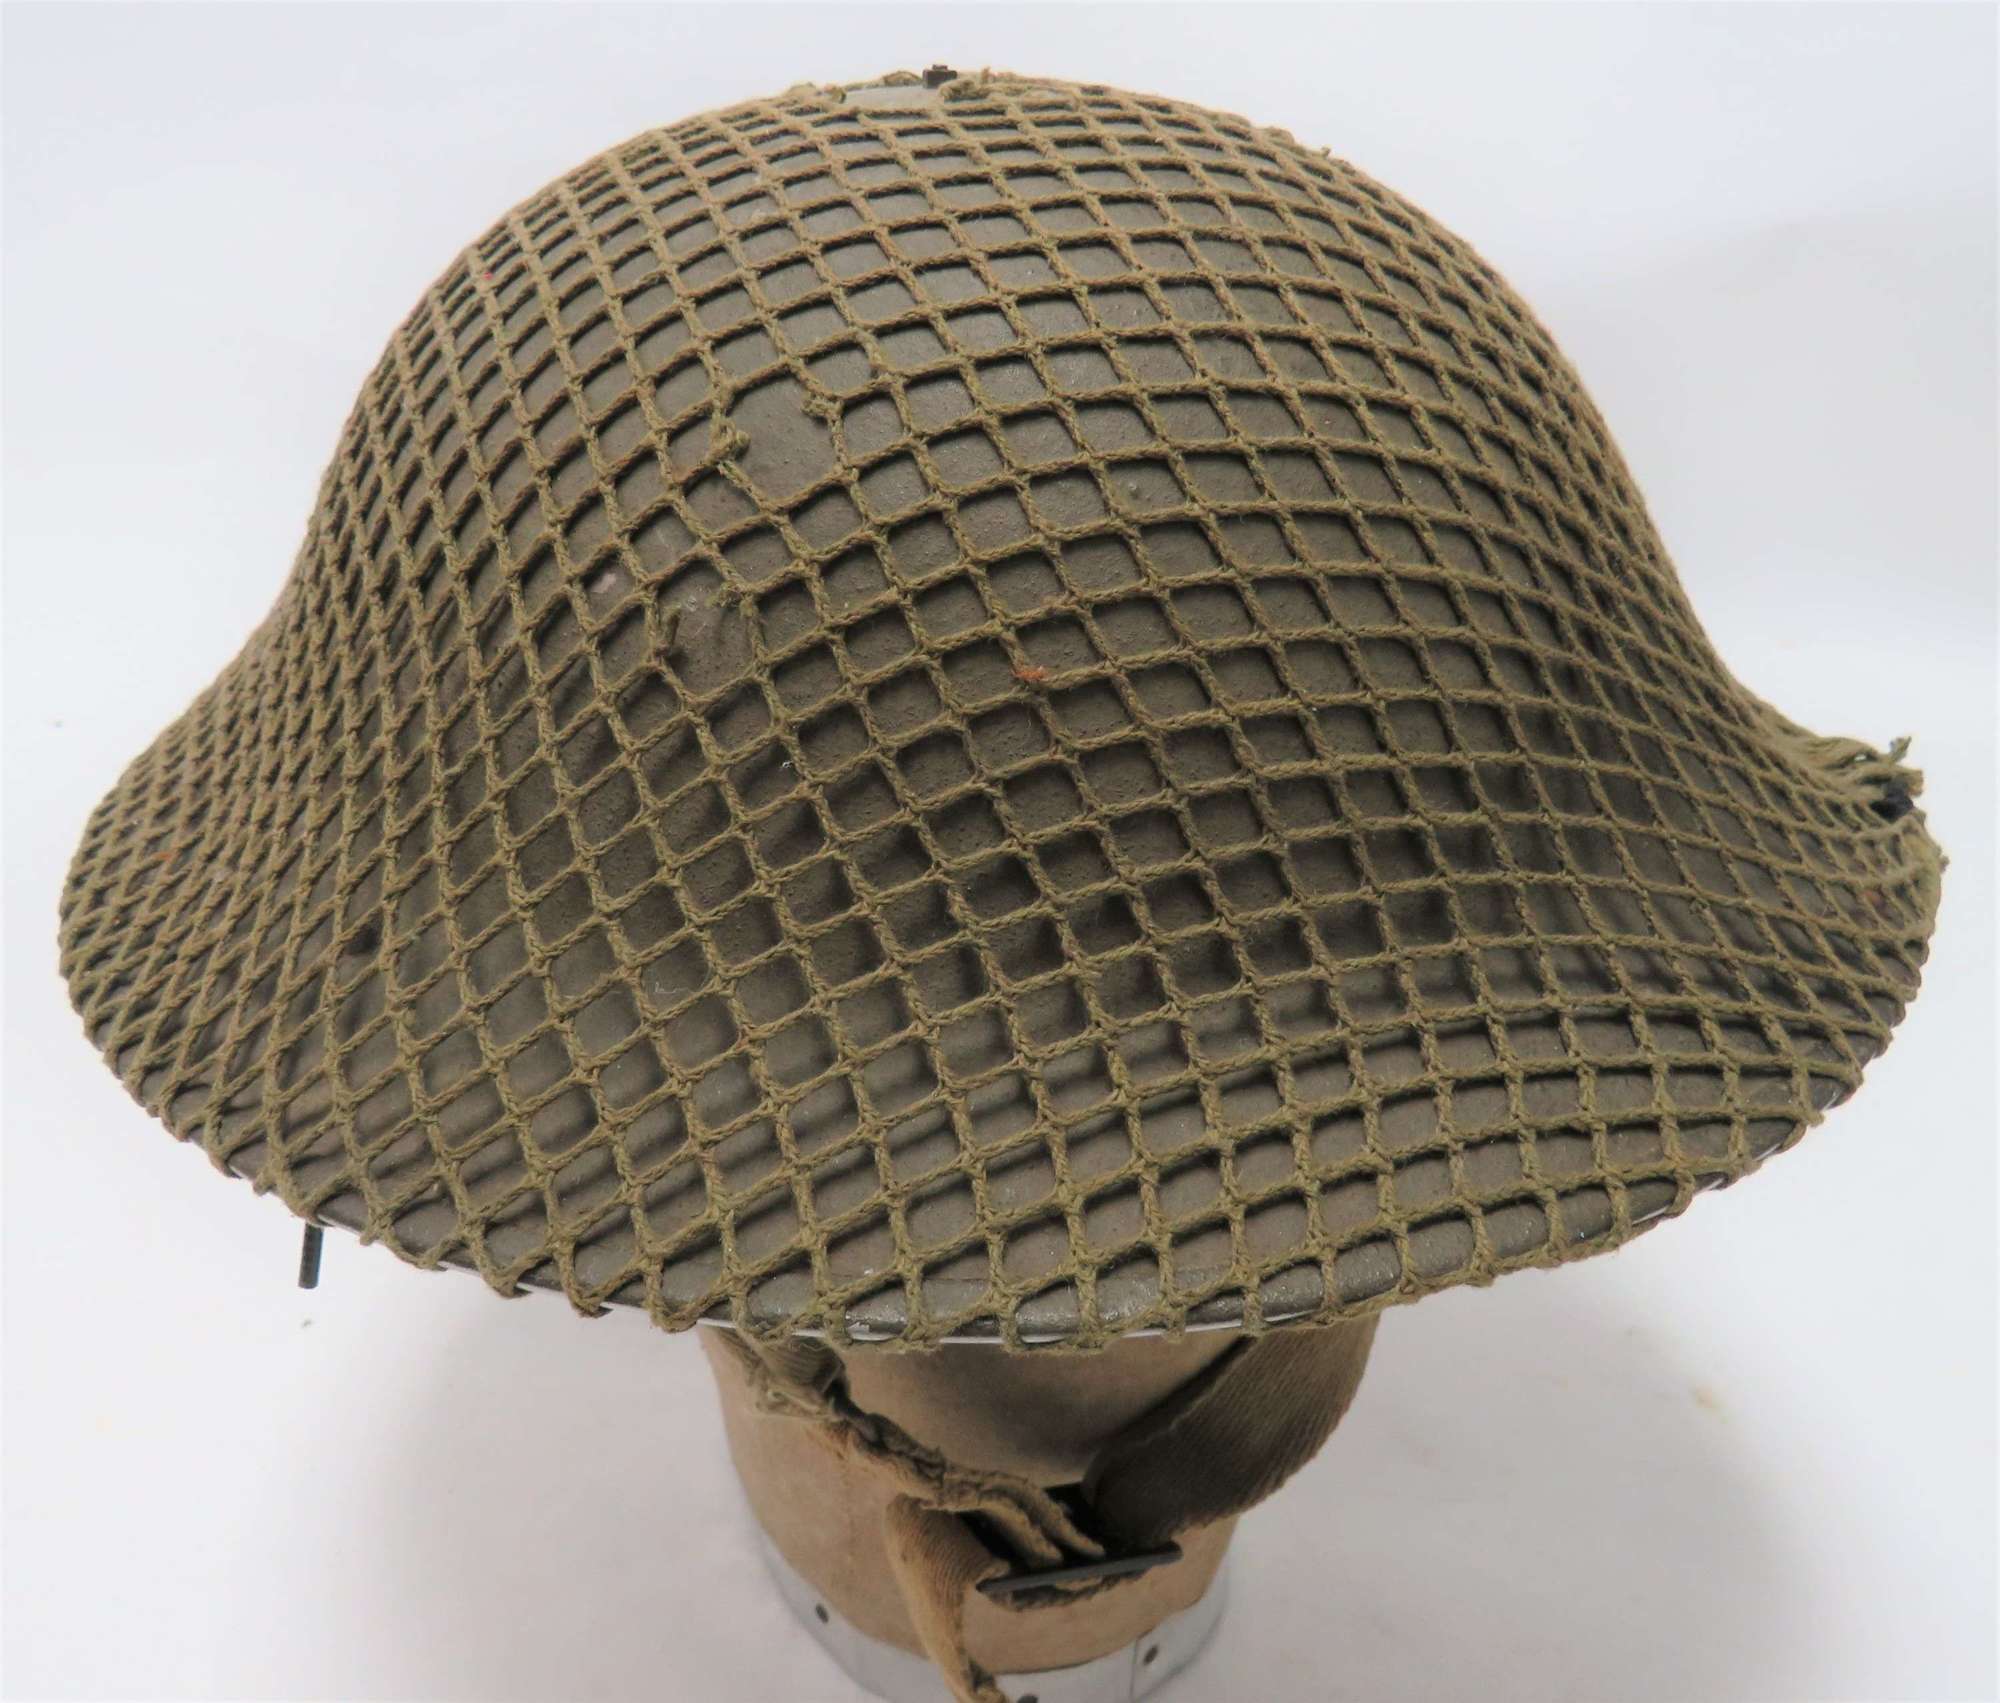 Early War Home Guard Steel Helmet with cammo cover